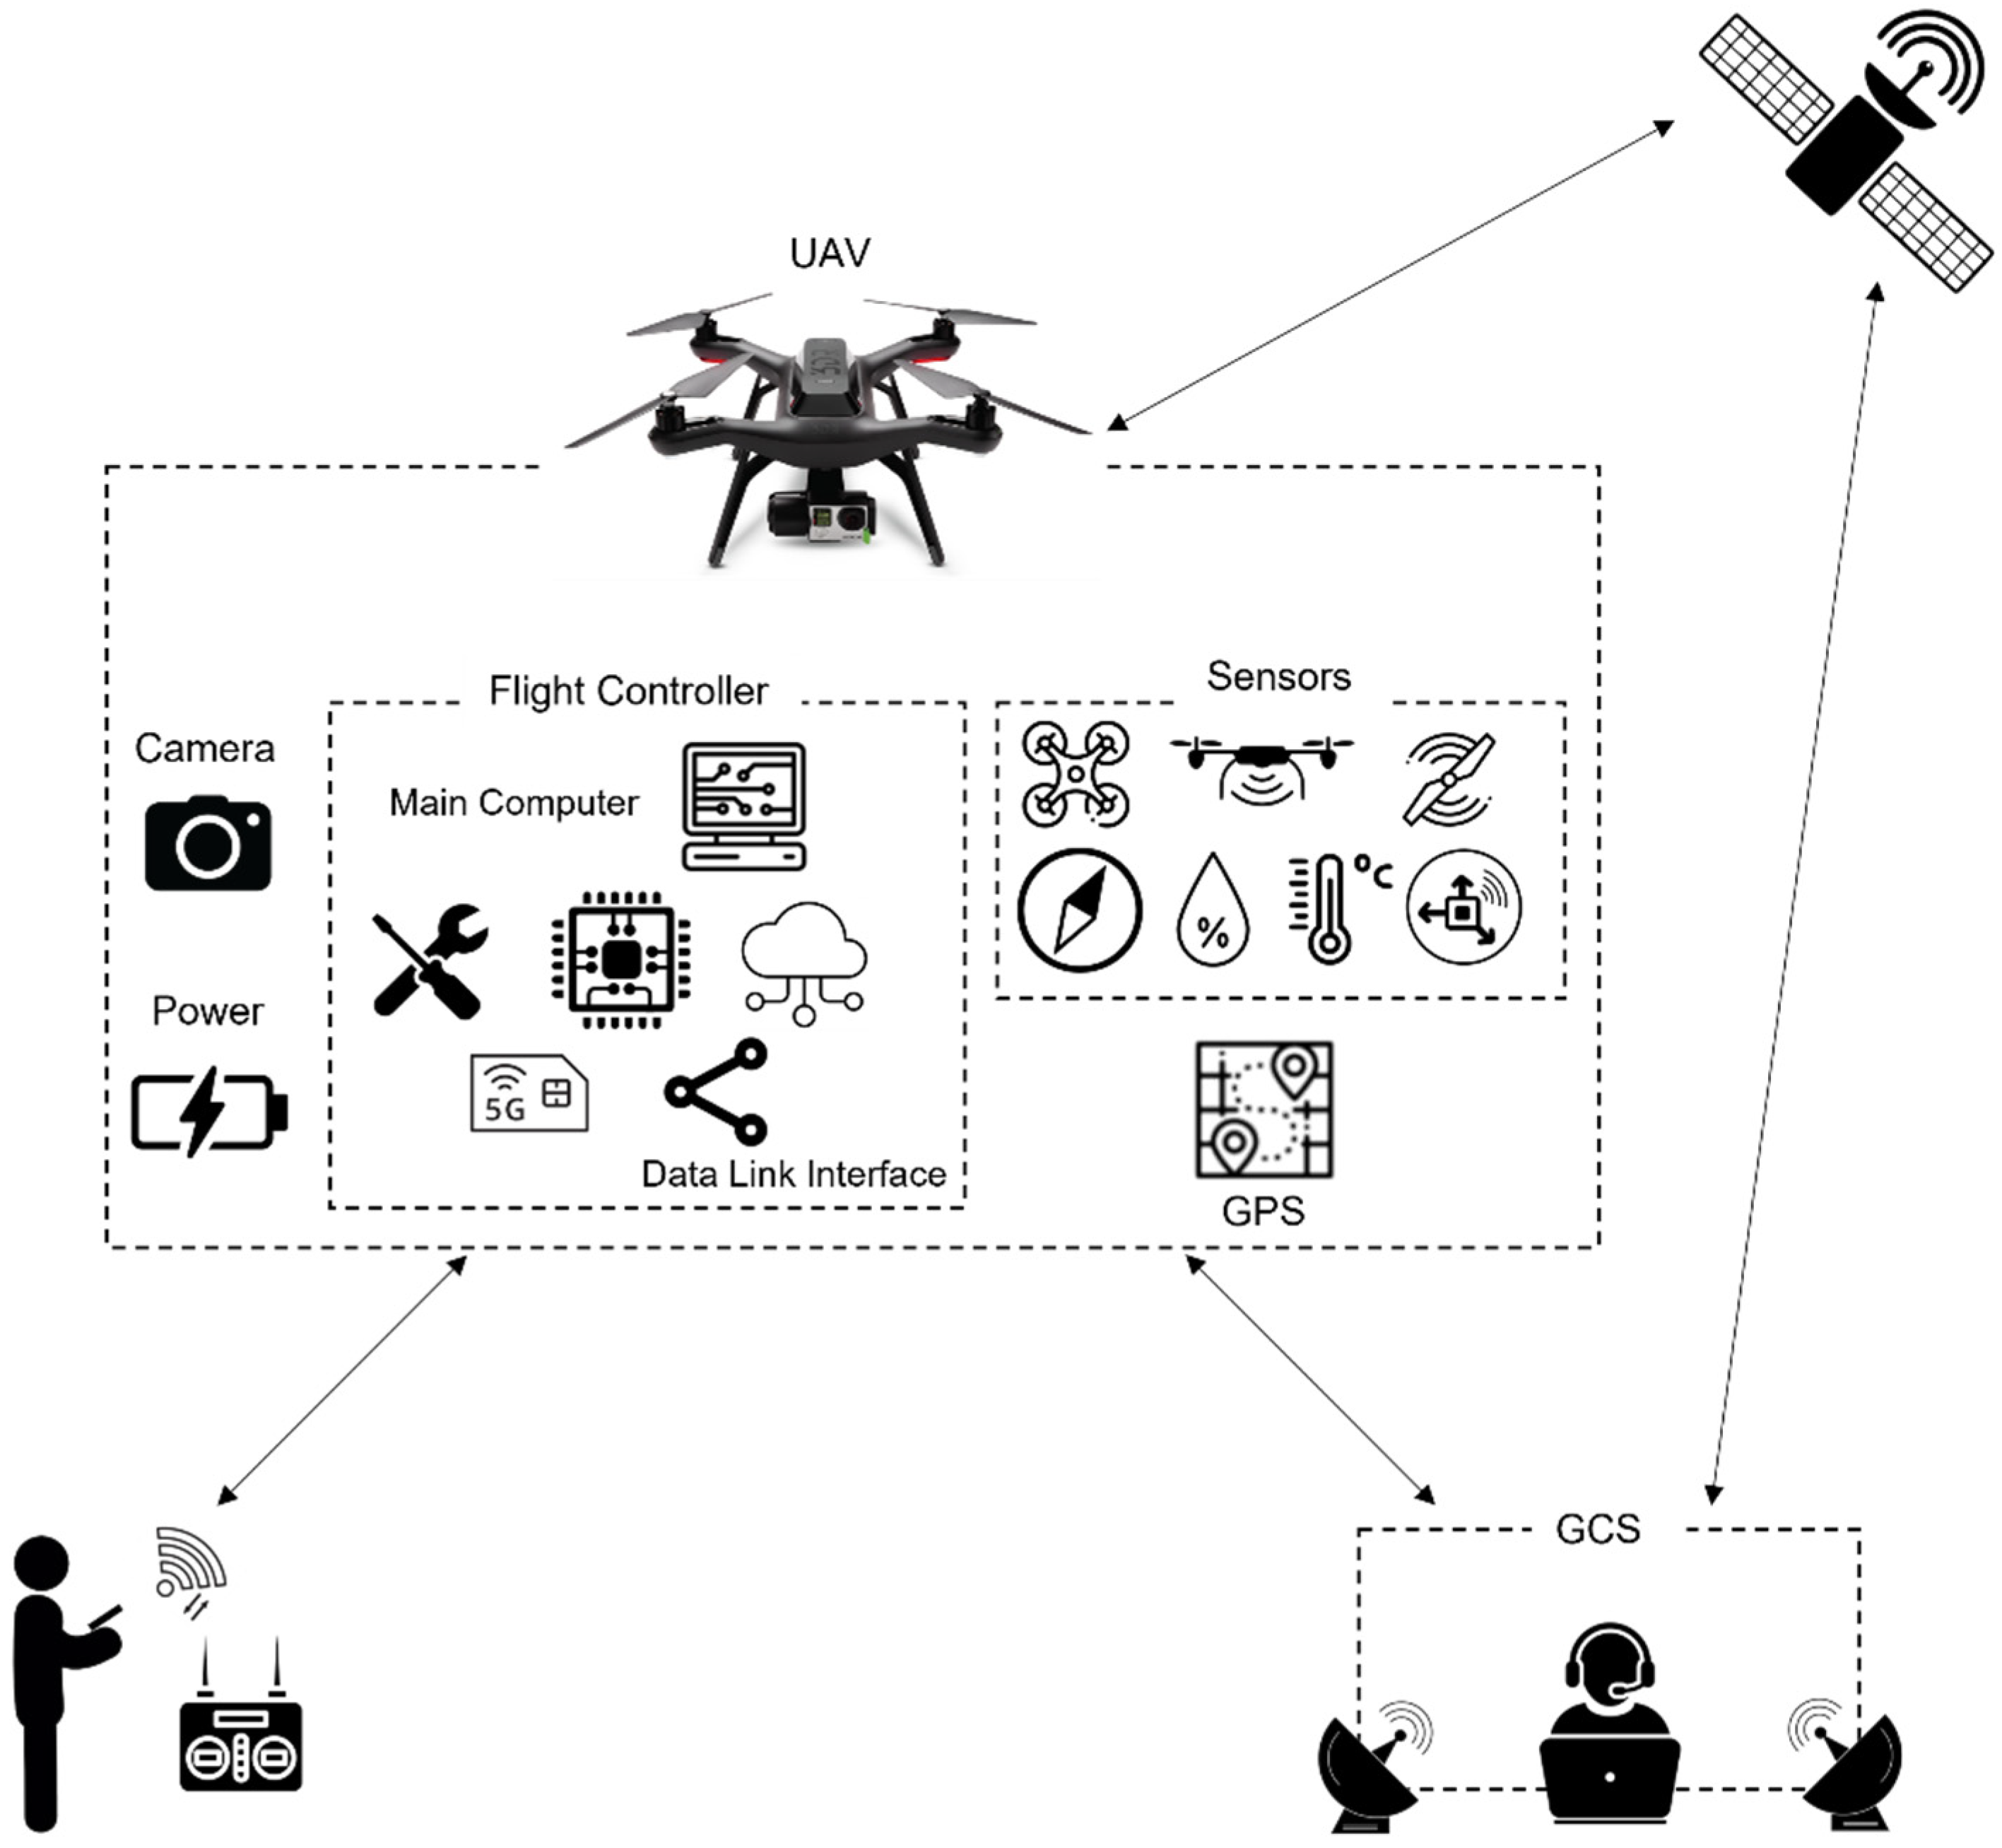 ieee research papers on drones